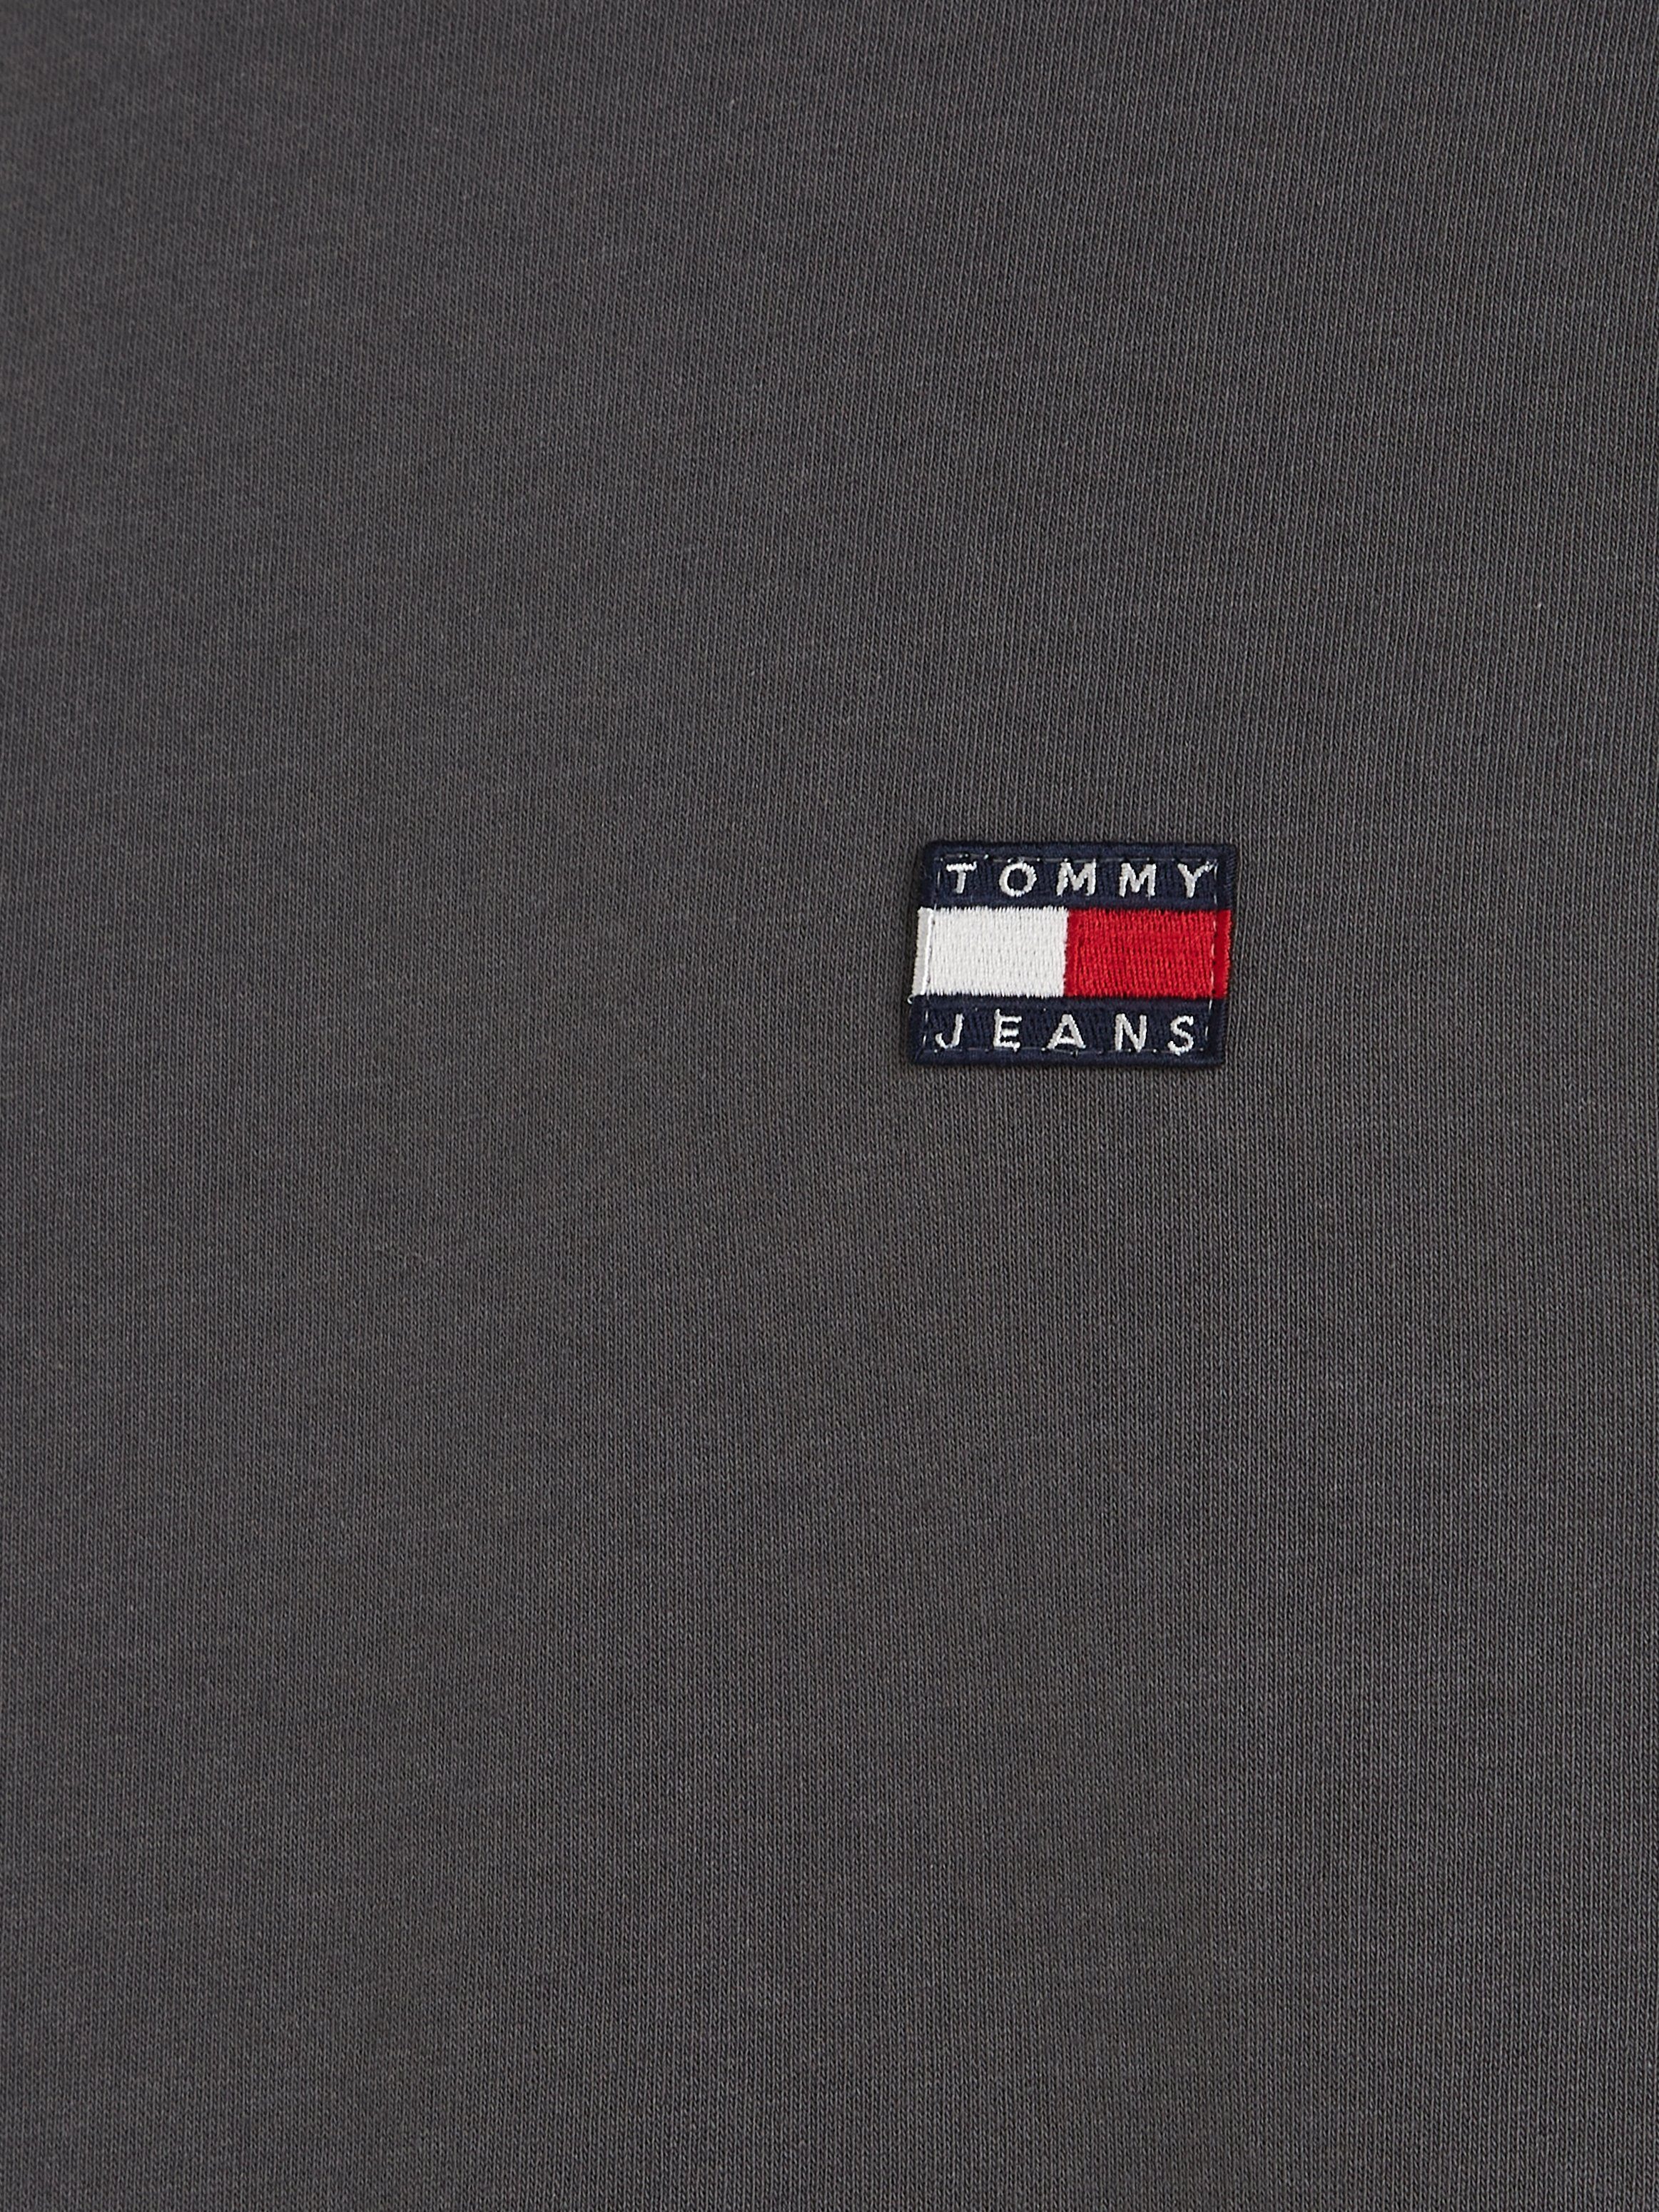 T-Shirt BADGE TOMMY Tommy TEE CLSC Charcoal TJM Jeans New XS